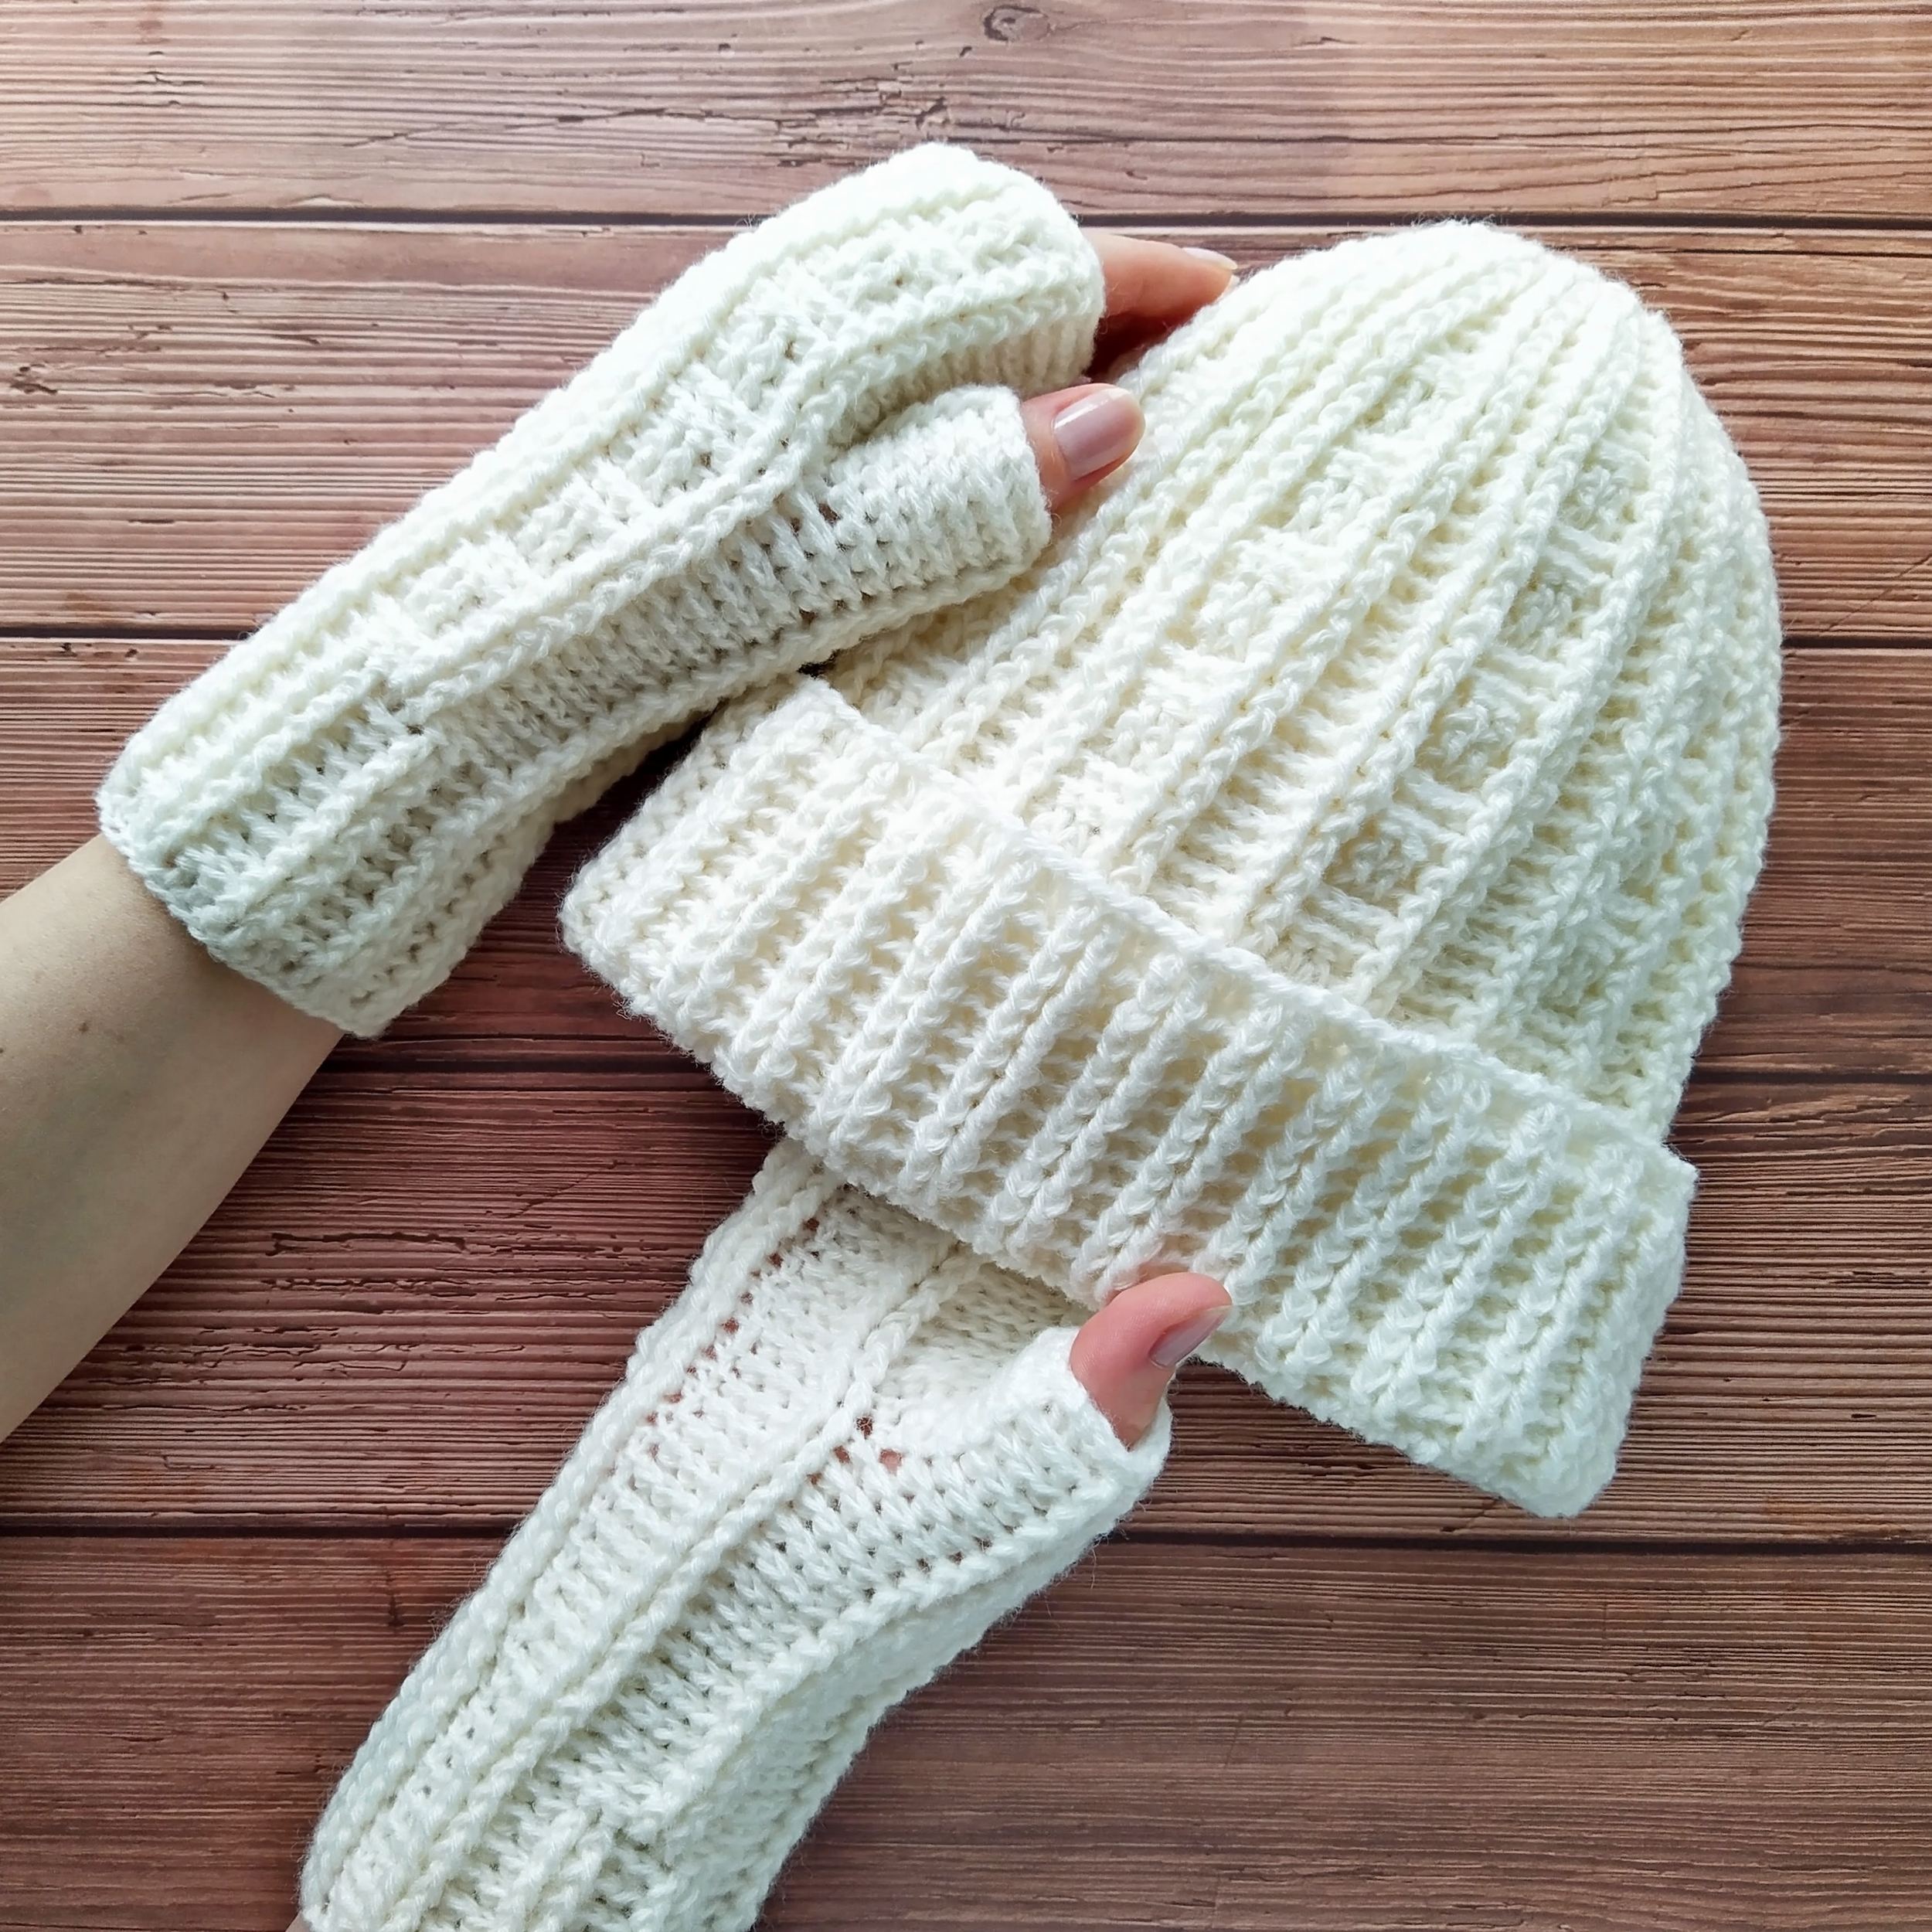 How to knit gloves with fingers - Step-by-step pattern for beginners  [+video]